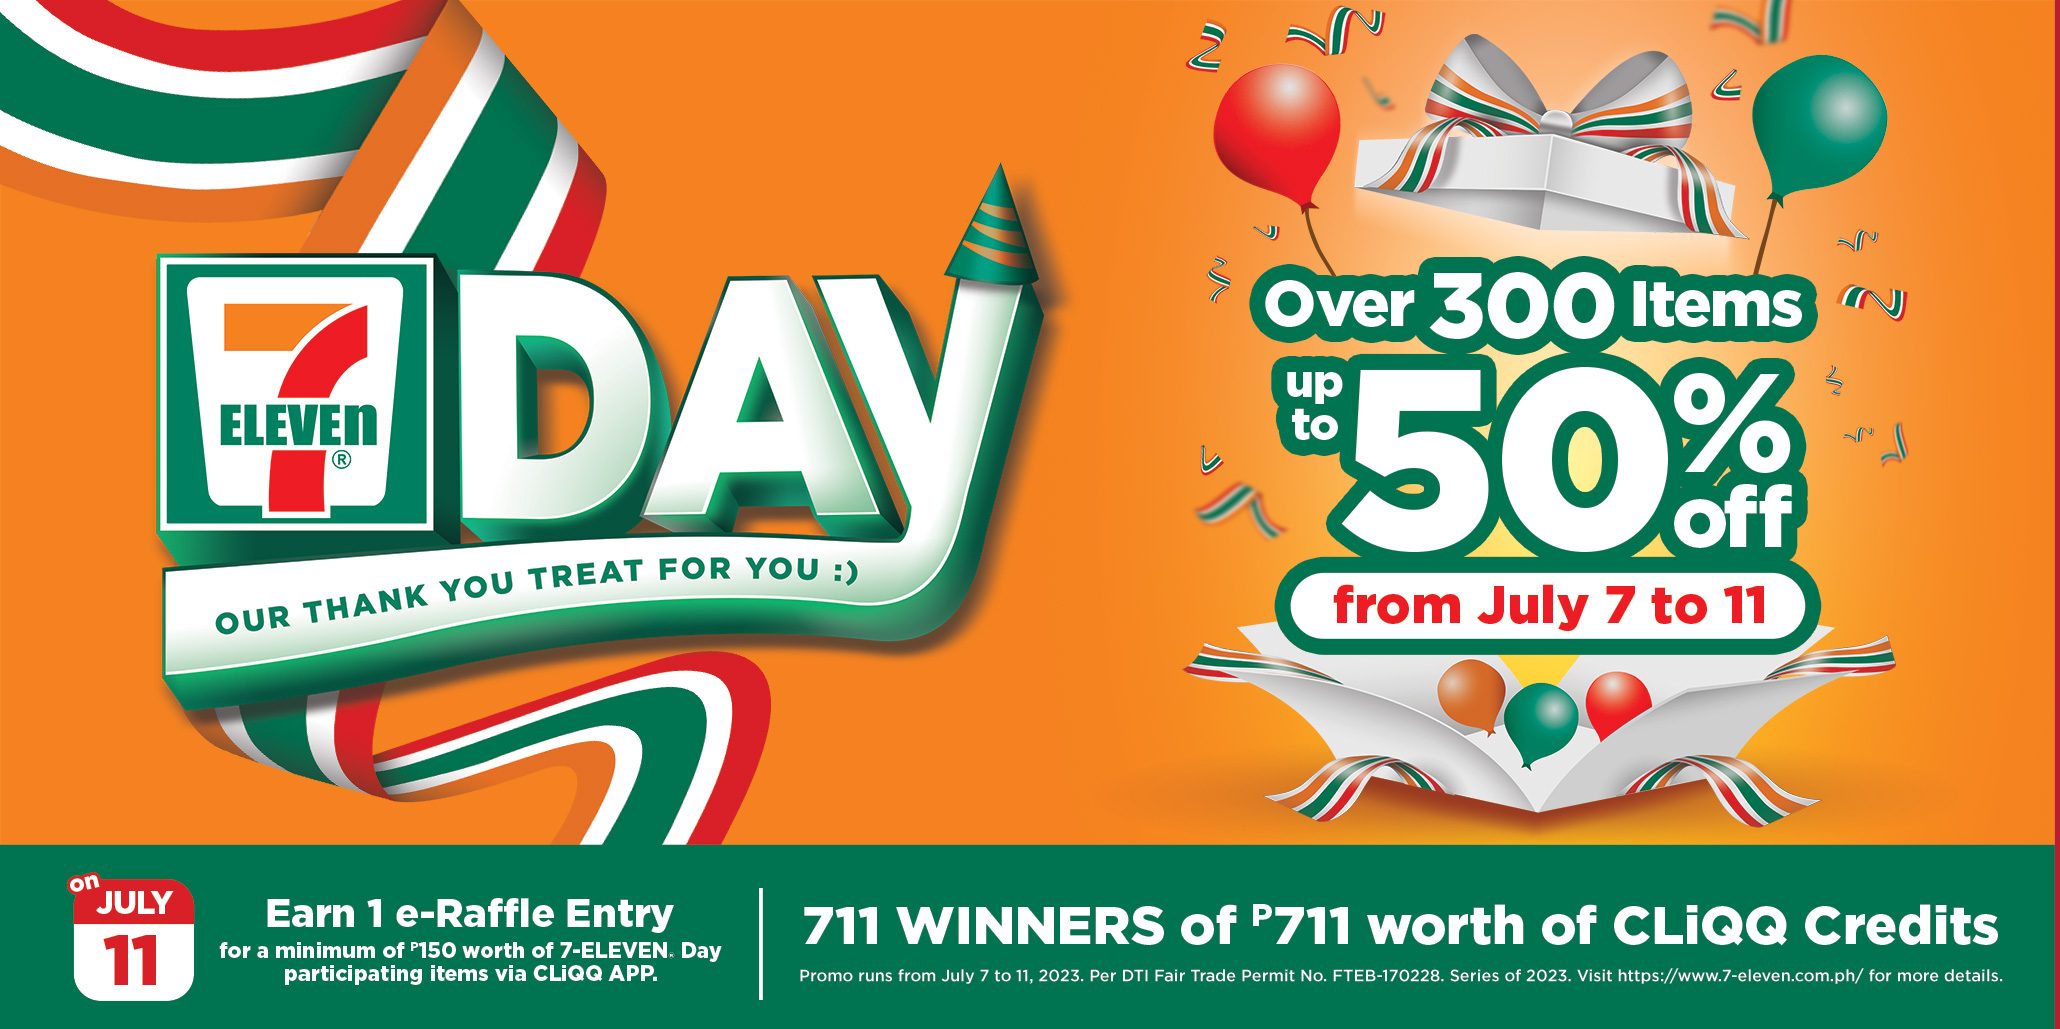 These are some of the sale items you can score during 7-Eleven’s grocery day